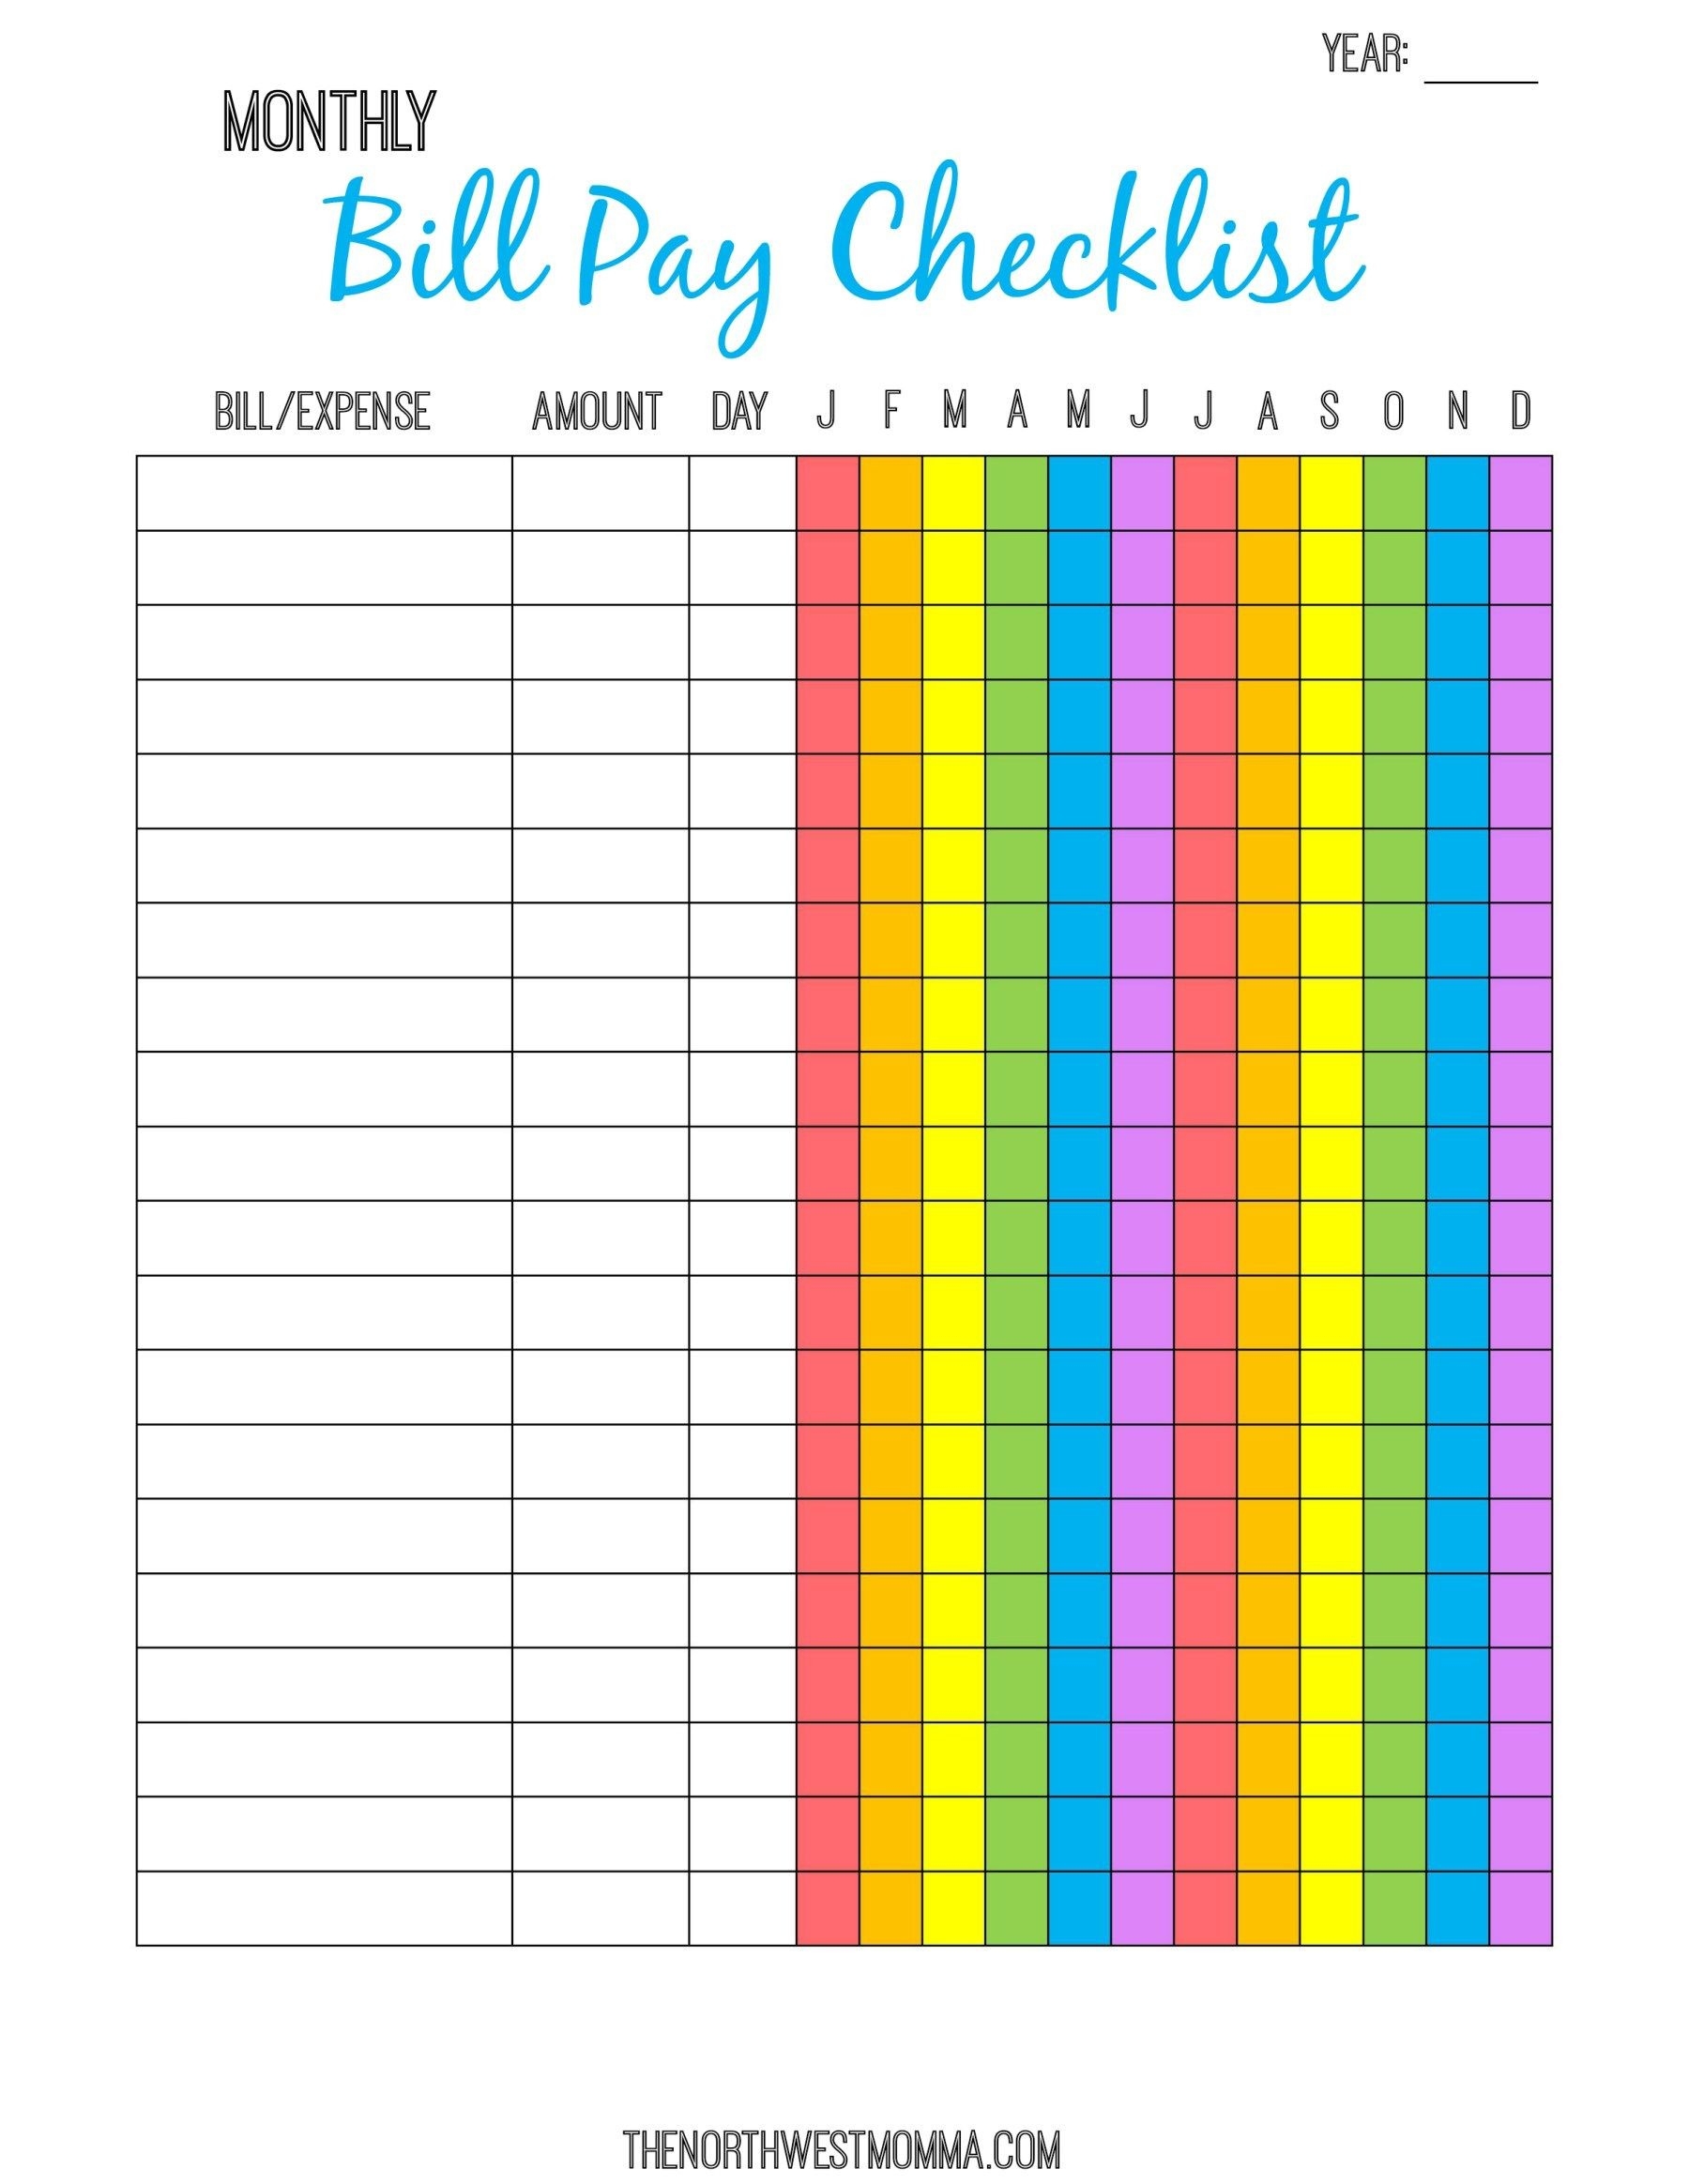 Monthly Bill Pay Checklist- Free Printable! | $ Saving Money-Blank Printable Monthly Bill Pay Worksheet